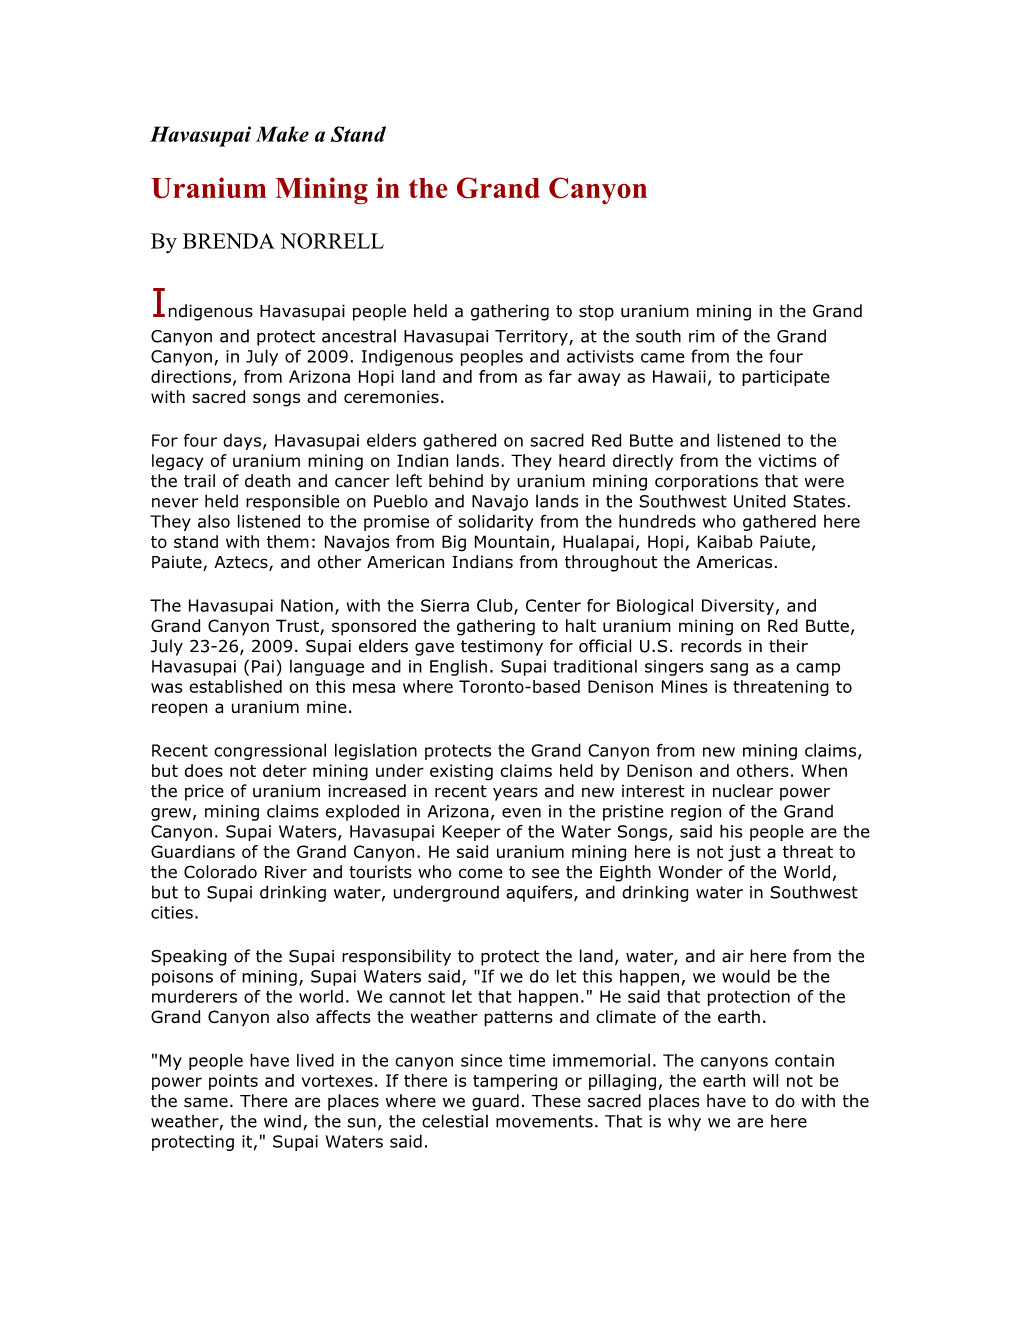 Uranium Mining in the Grand Canyon